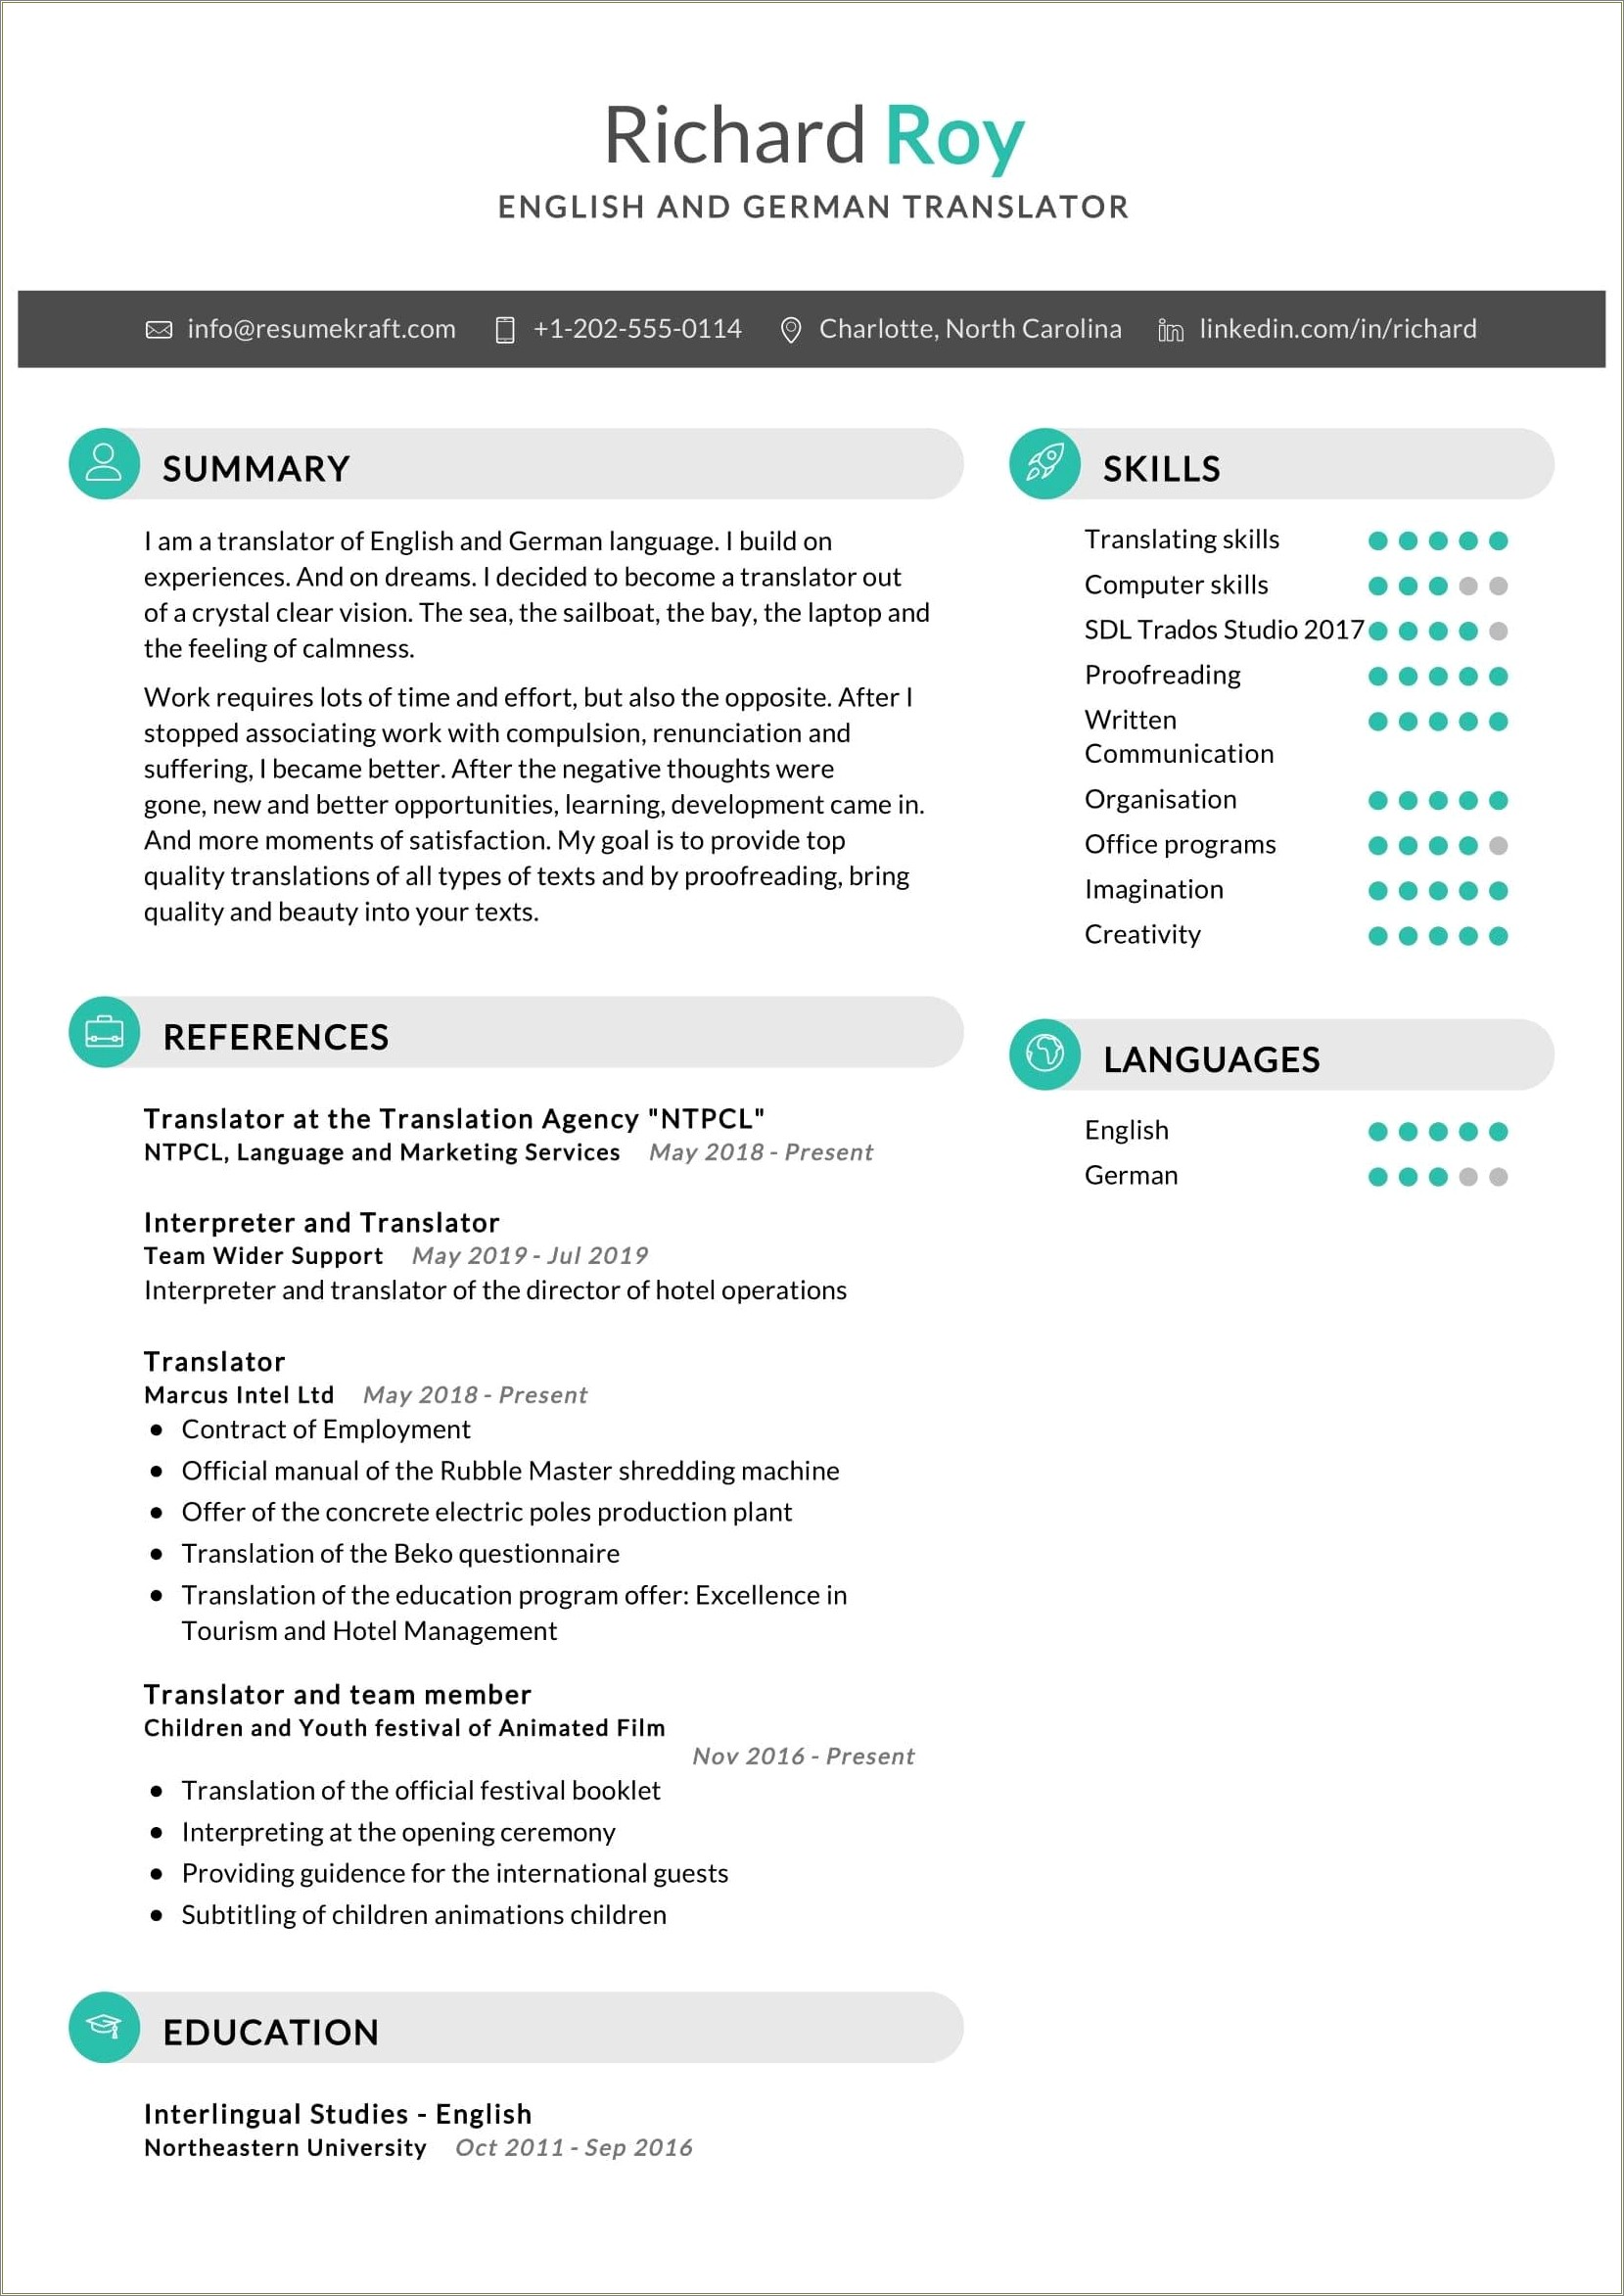 Examples For Resumes In An Interpreter Job